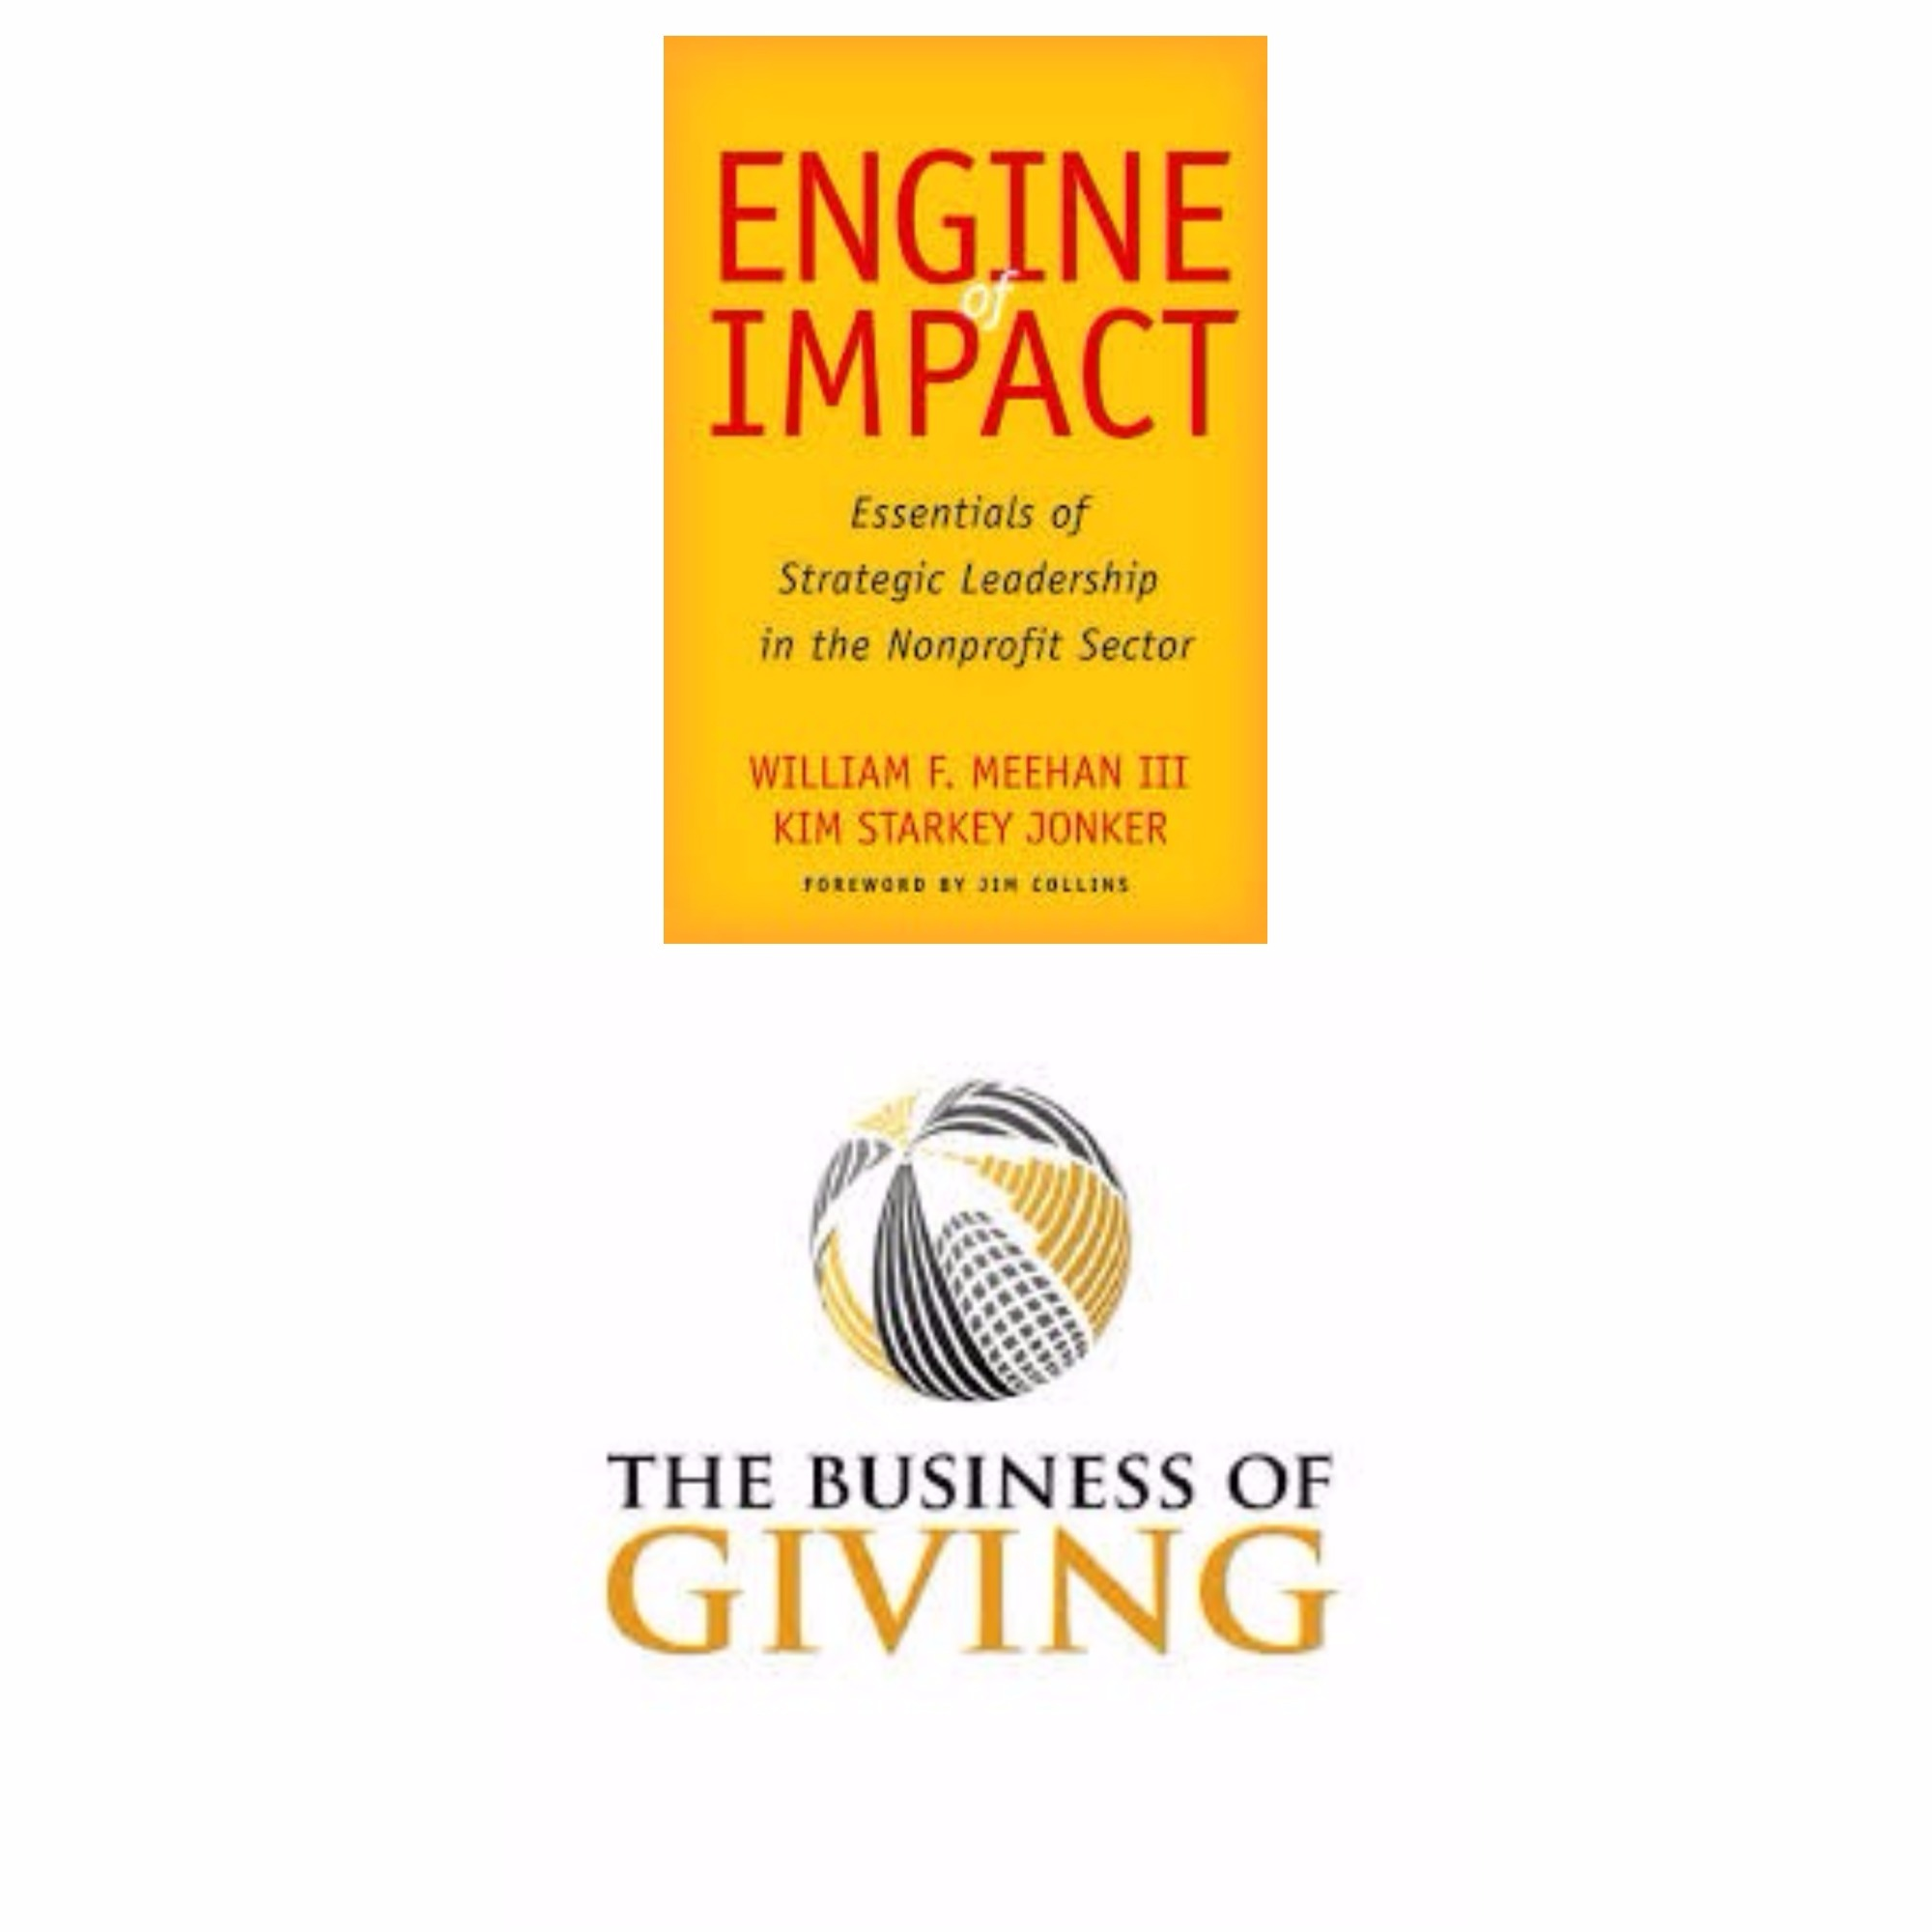  William Meehan and Kim Starkey Jonker,  co-authors of Engine of Impact